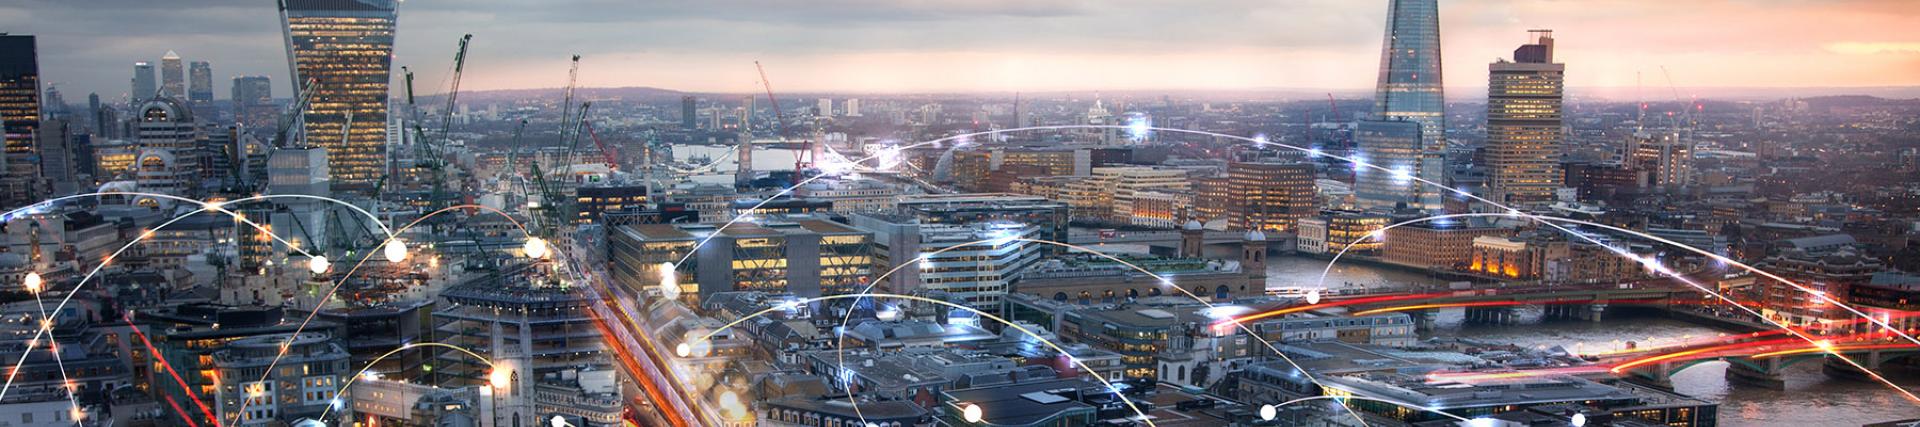 An aerial view of London, overlaid with network icons